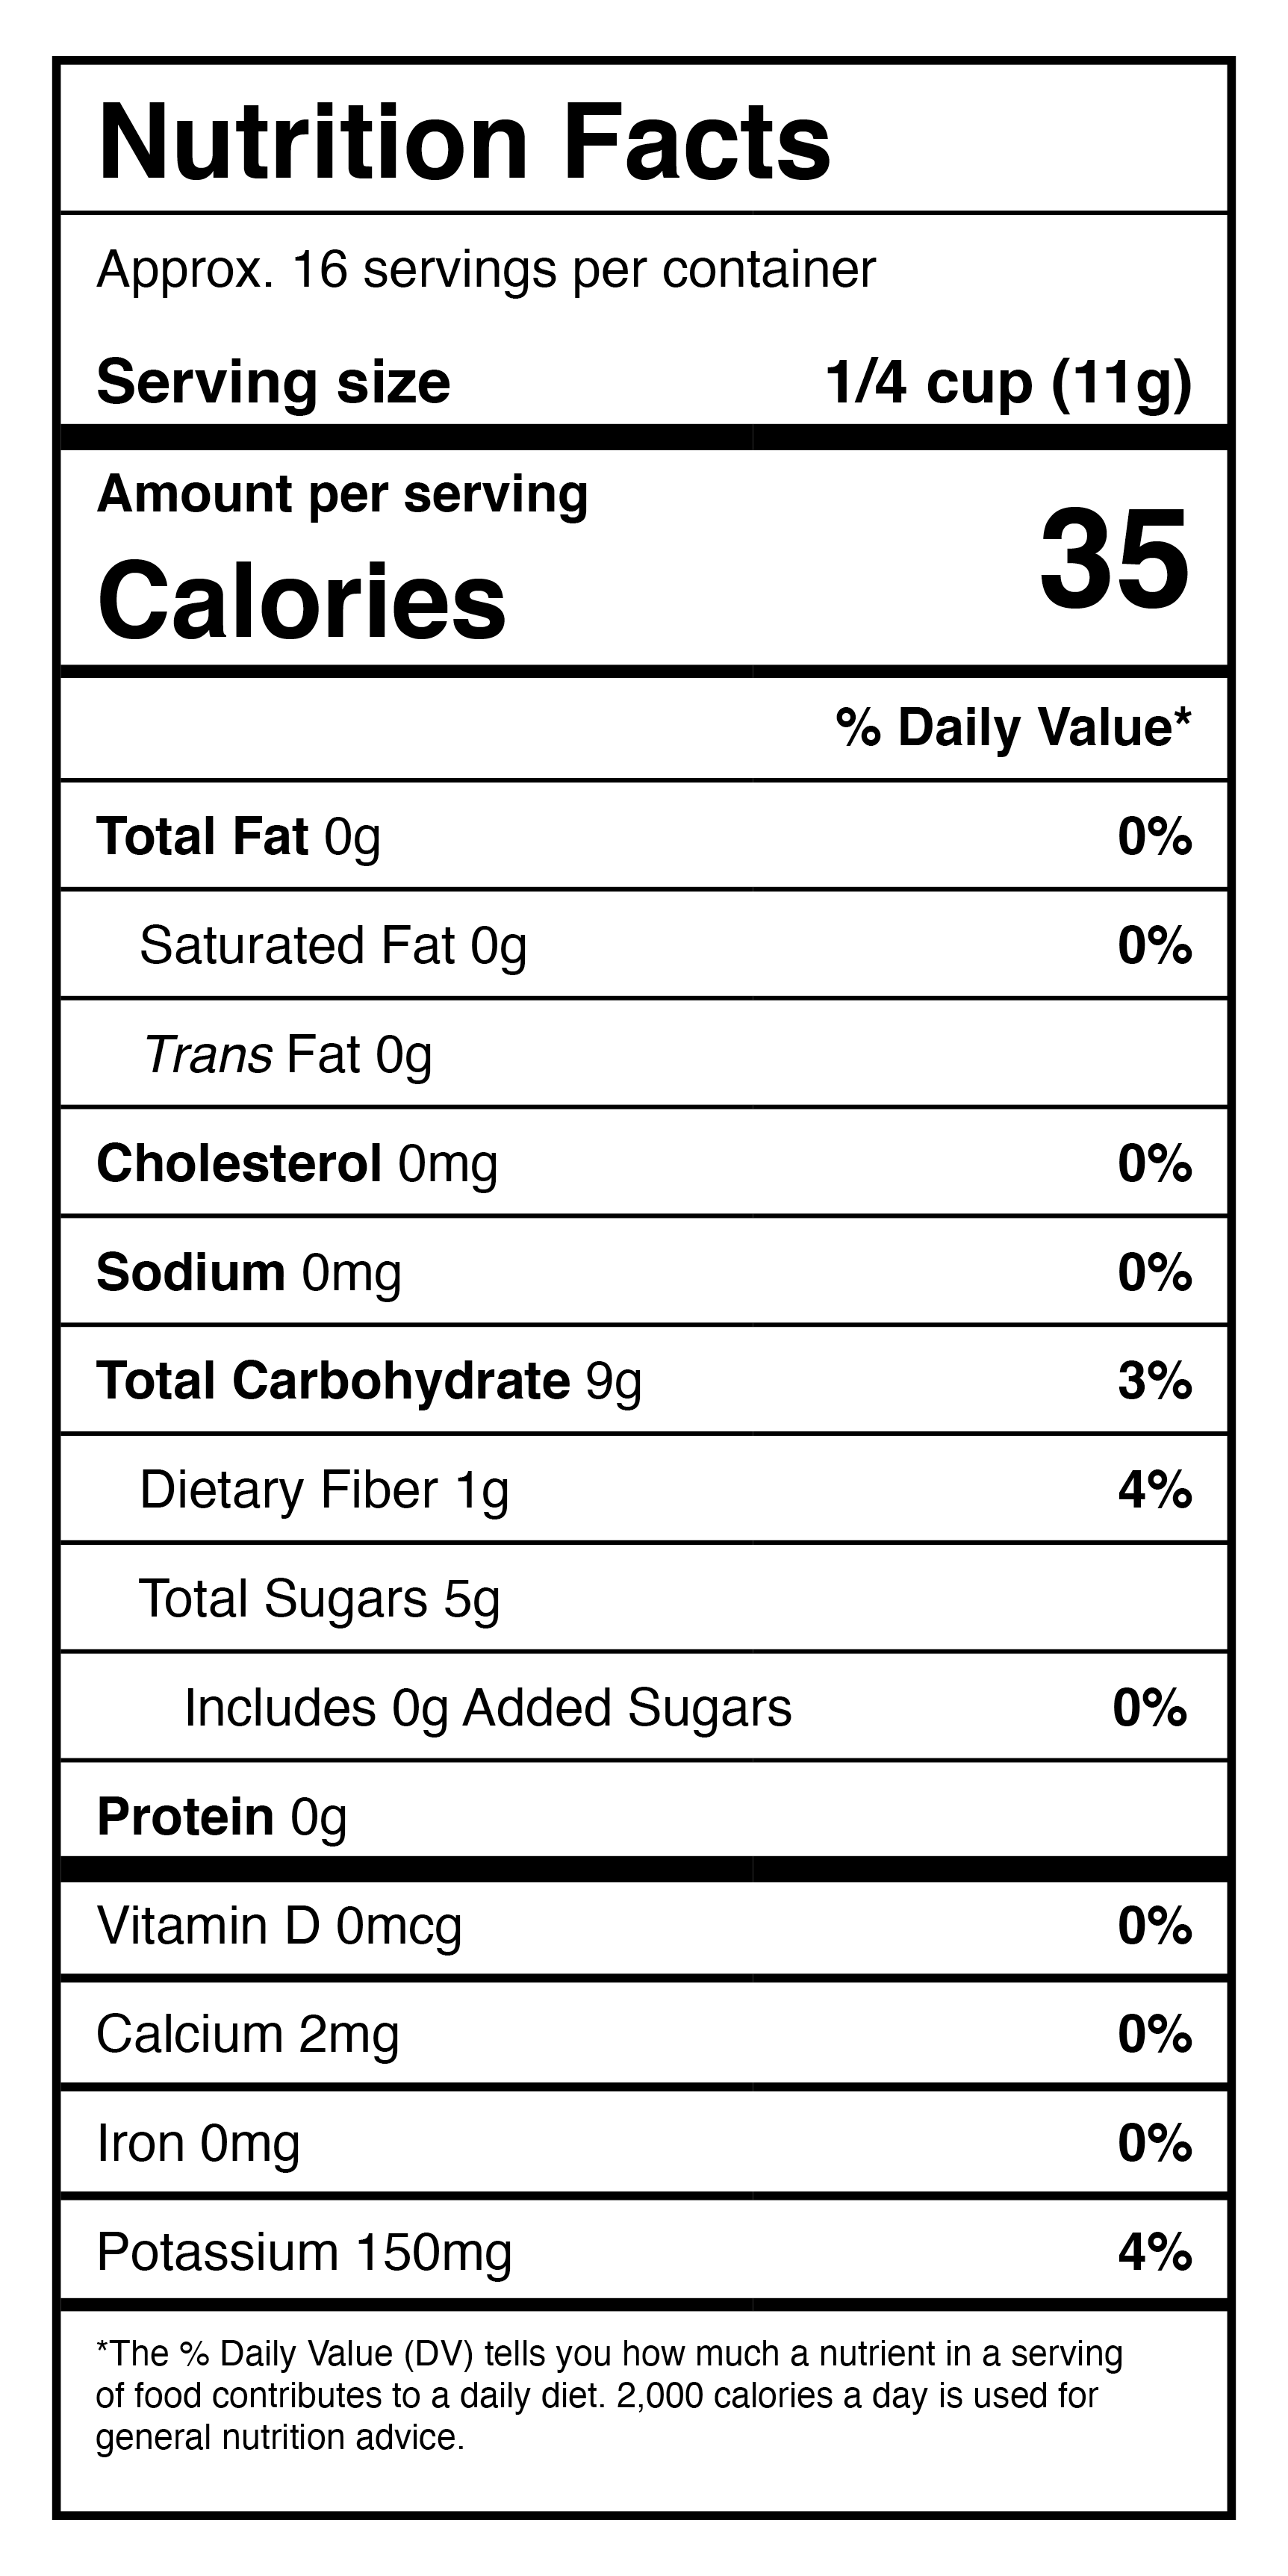 A nutrition label for a protein bar containing Harmony House Freeze Dried Bananas.